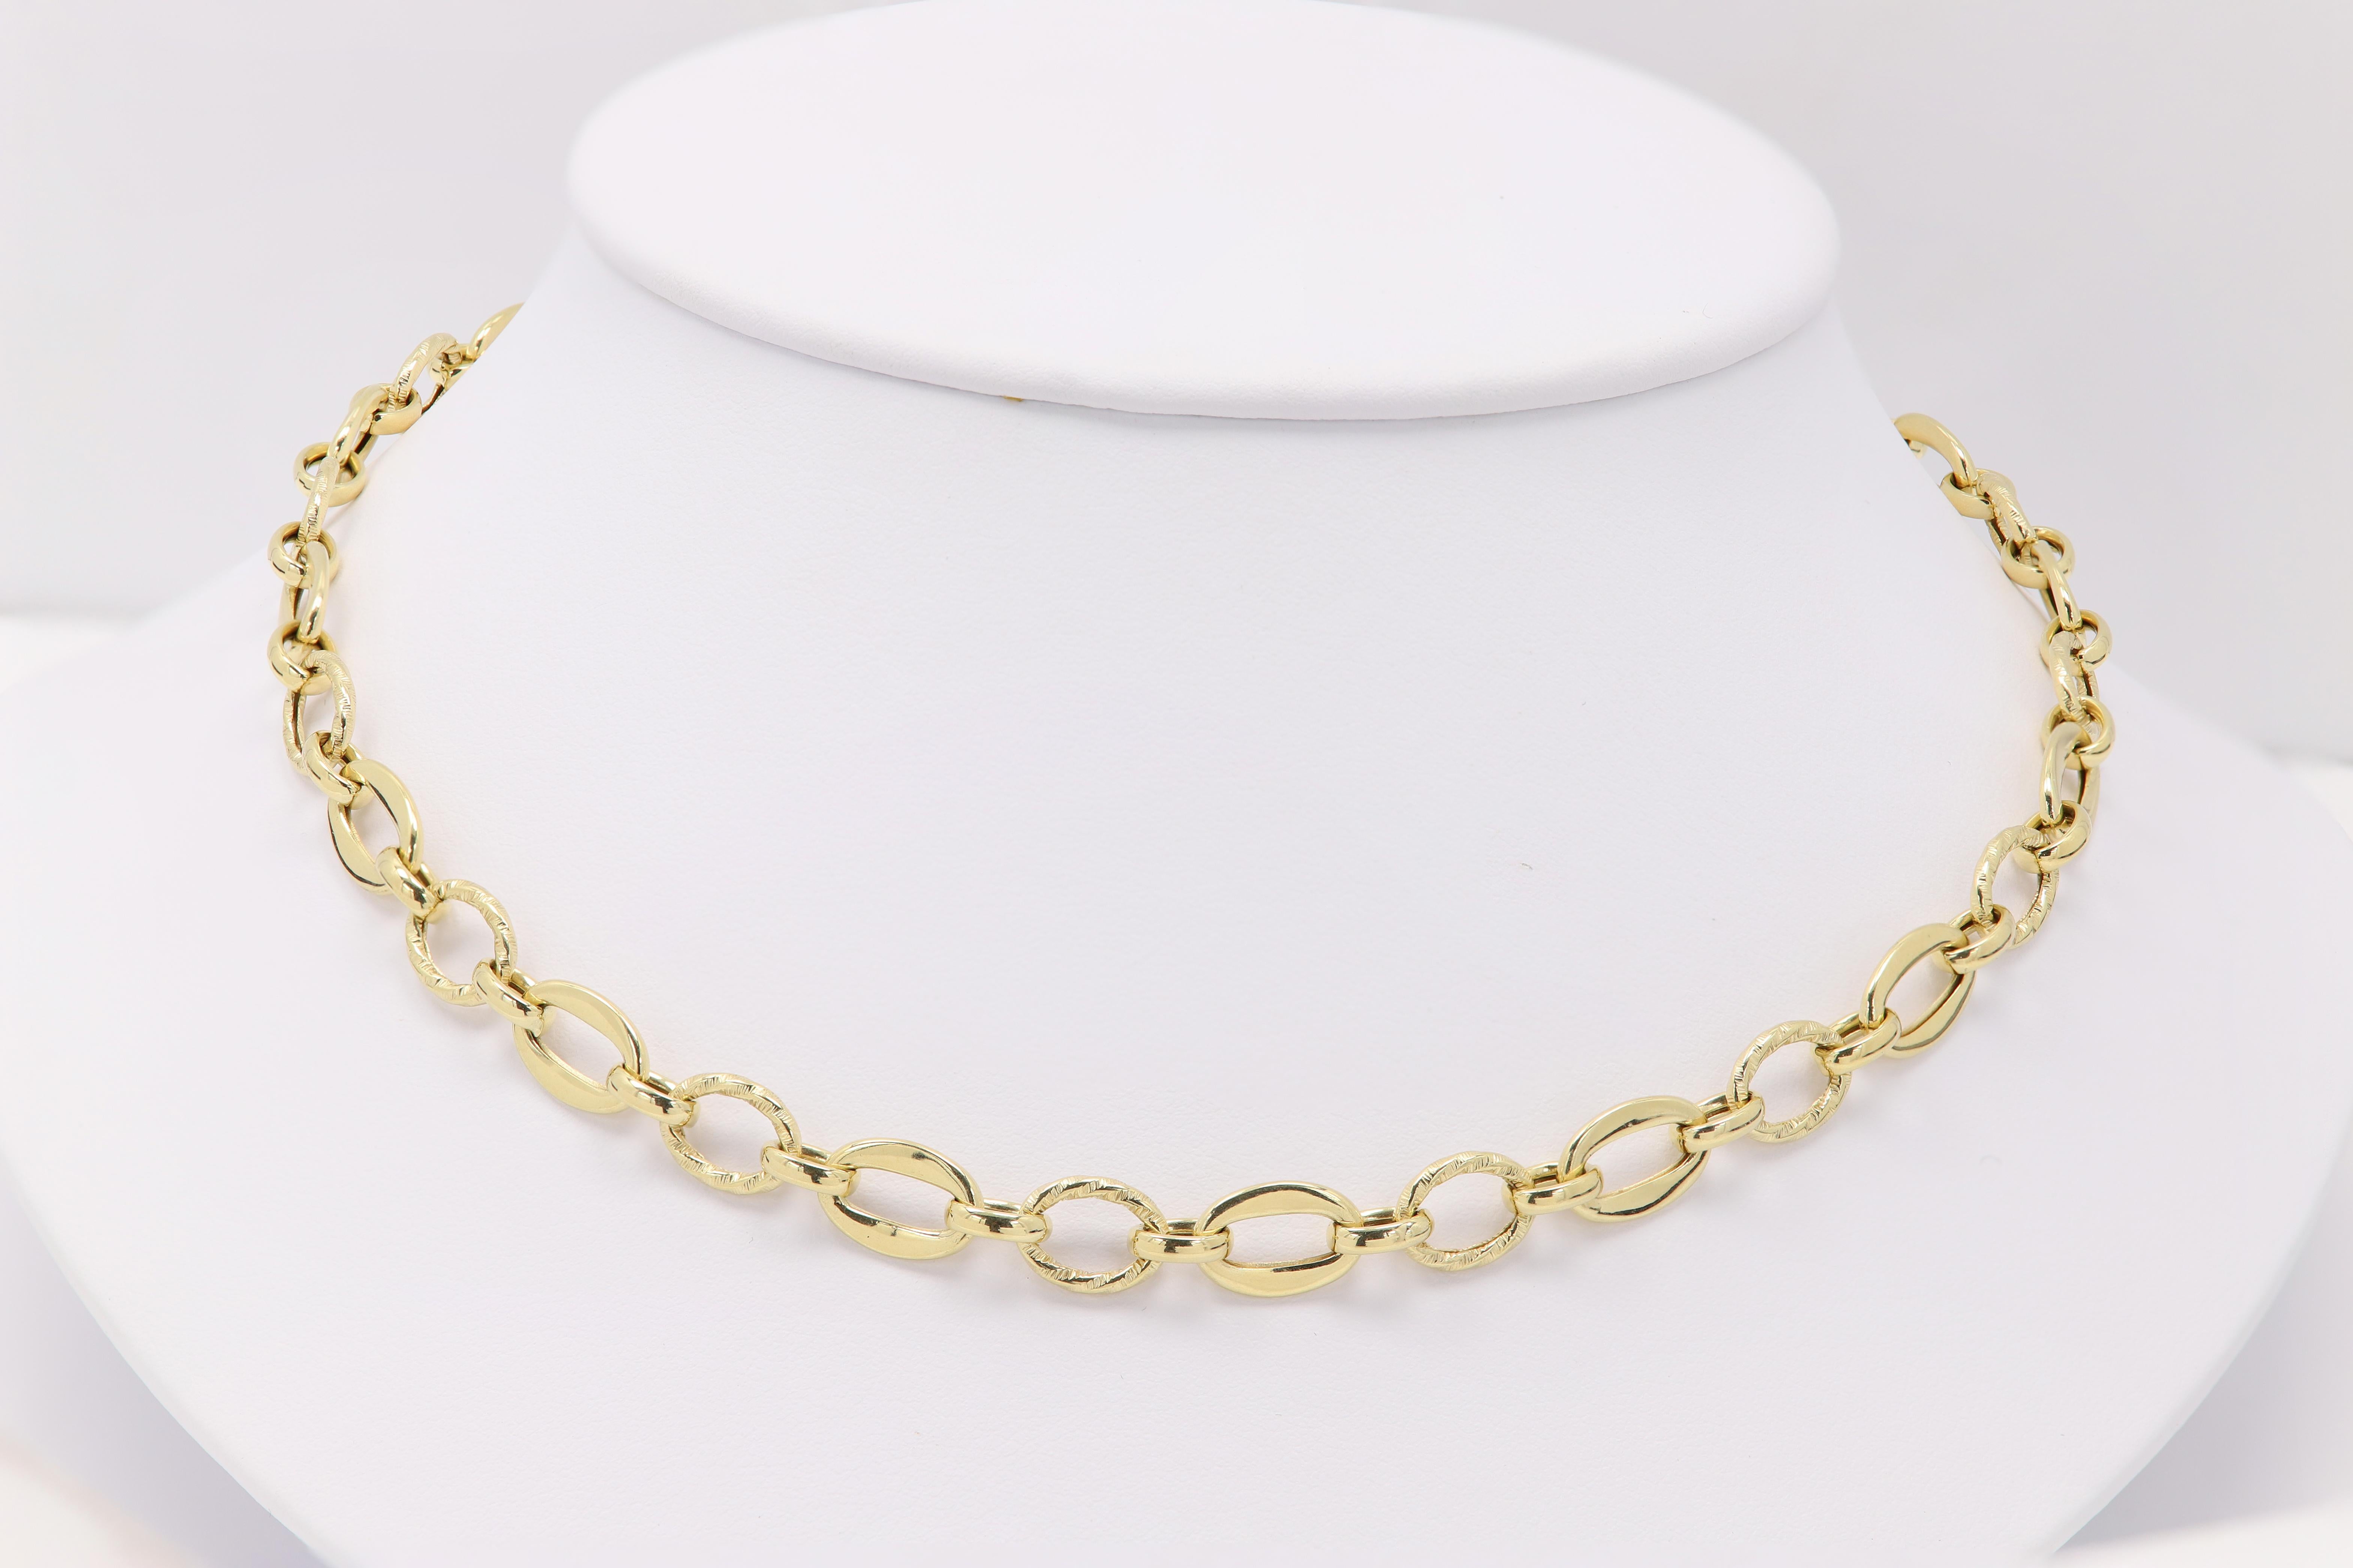 Italian Creative Link Chain set Necklace and Bracelet 14 Karat Yellow Gold Links For Sale 5